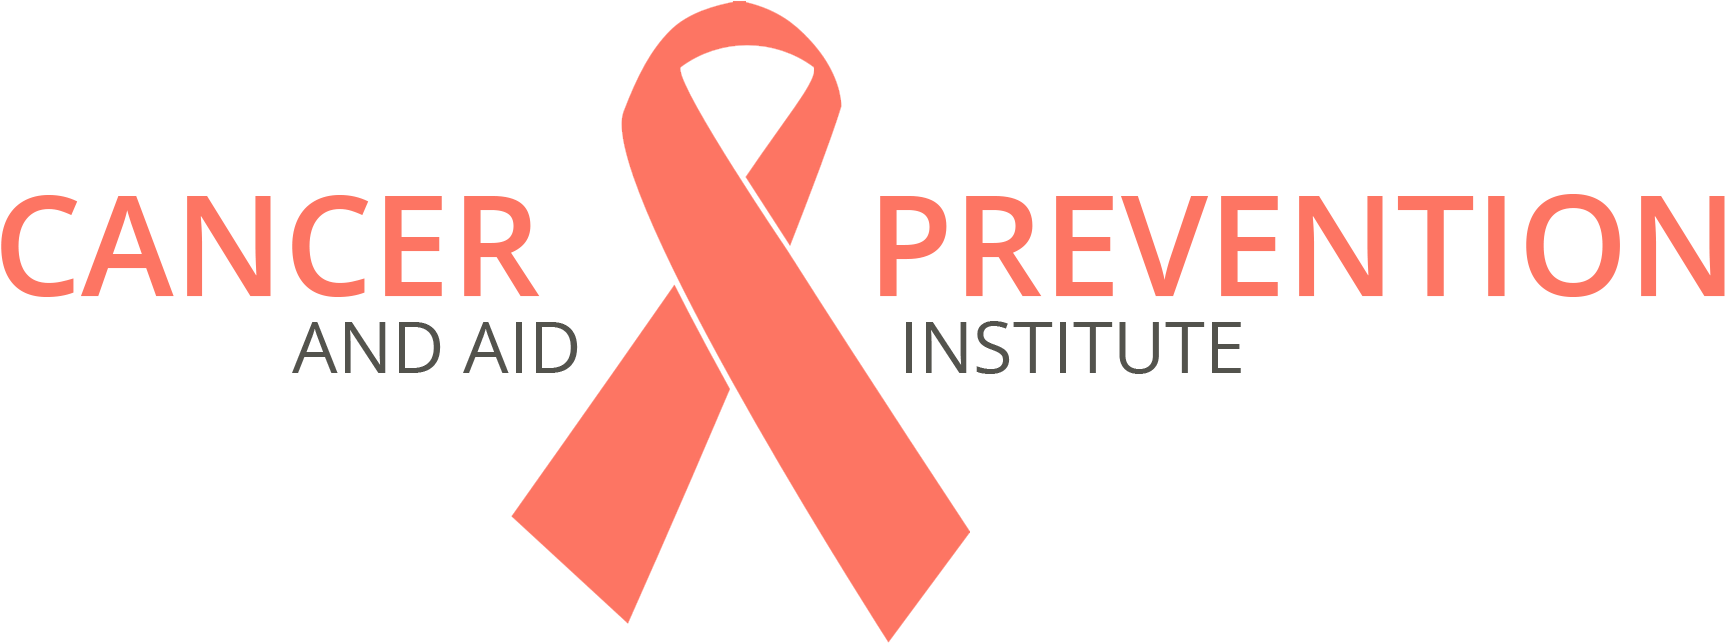 Cancer Prevention And Aid Institute - Information (1833x642), Png Download